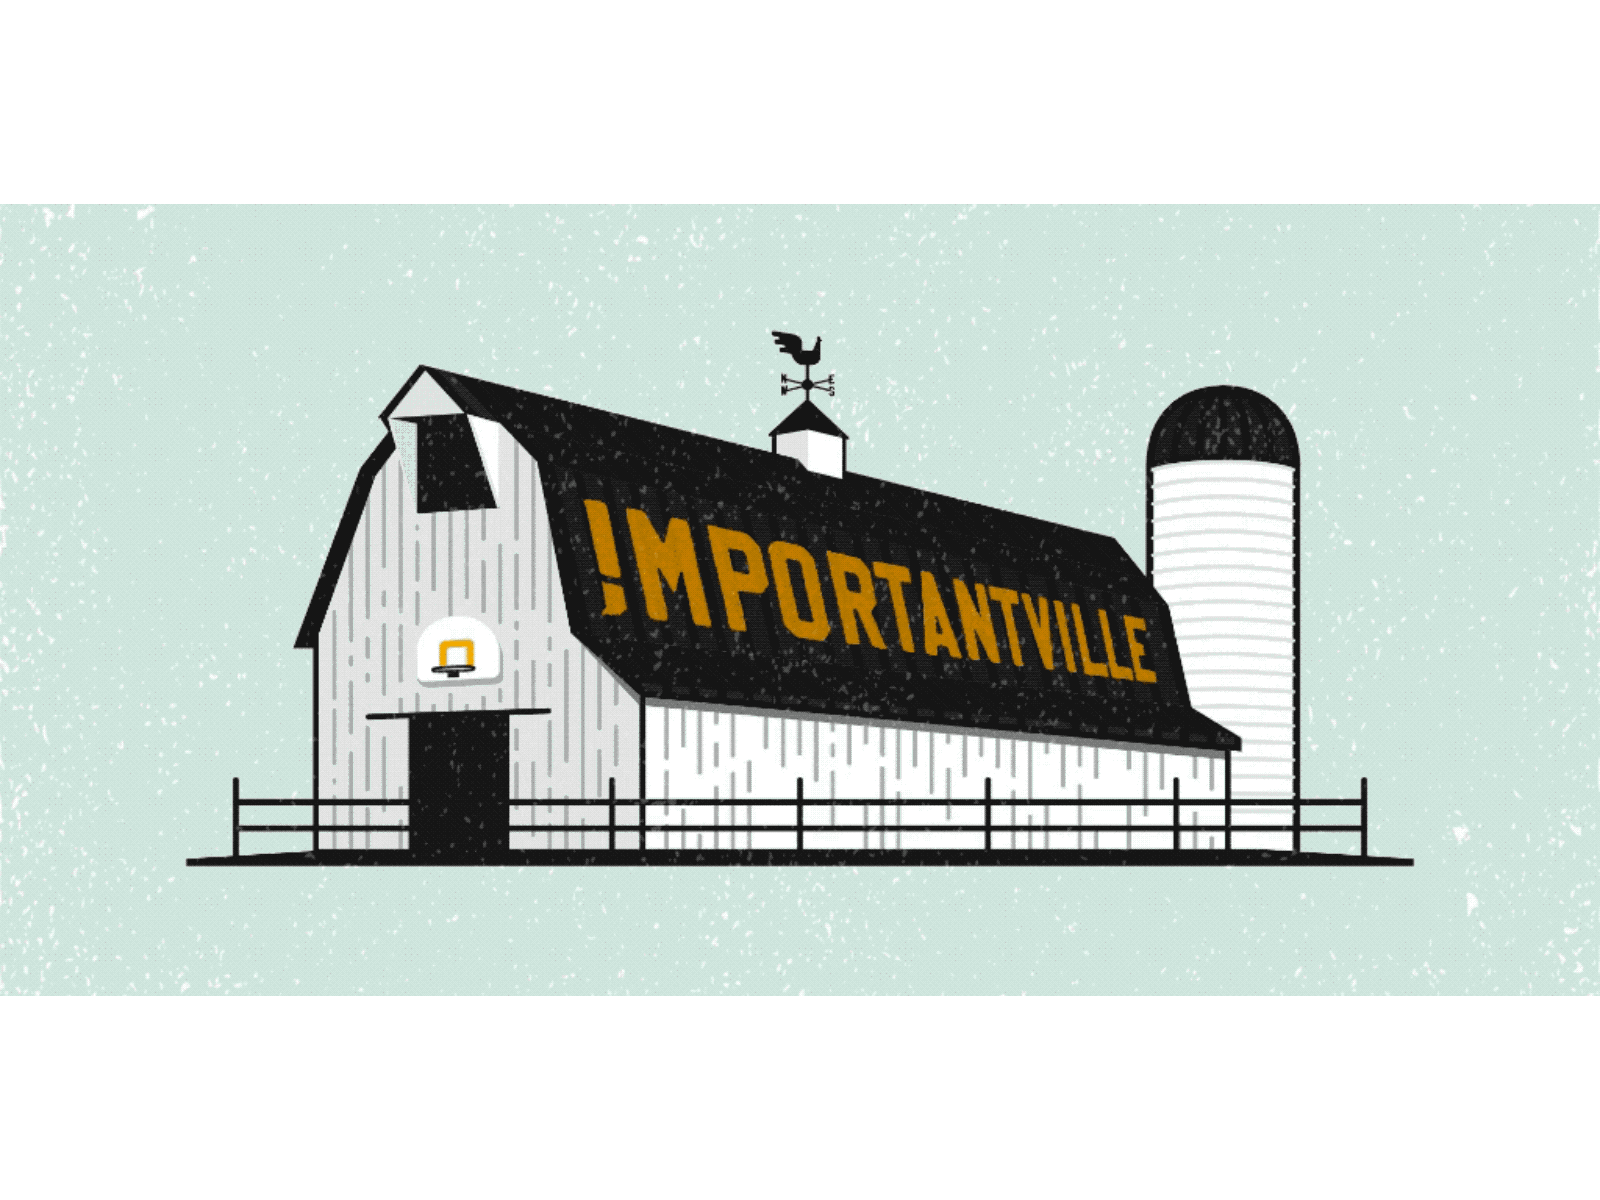 Importantville Rebrand barn country goldenrod hoosier indiana indianapolis indy letterpress logo midwest midwestern rural weather vane